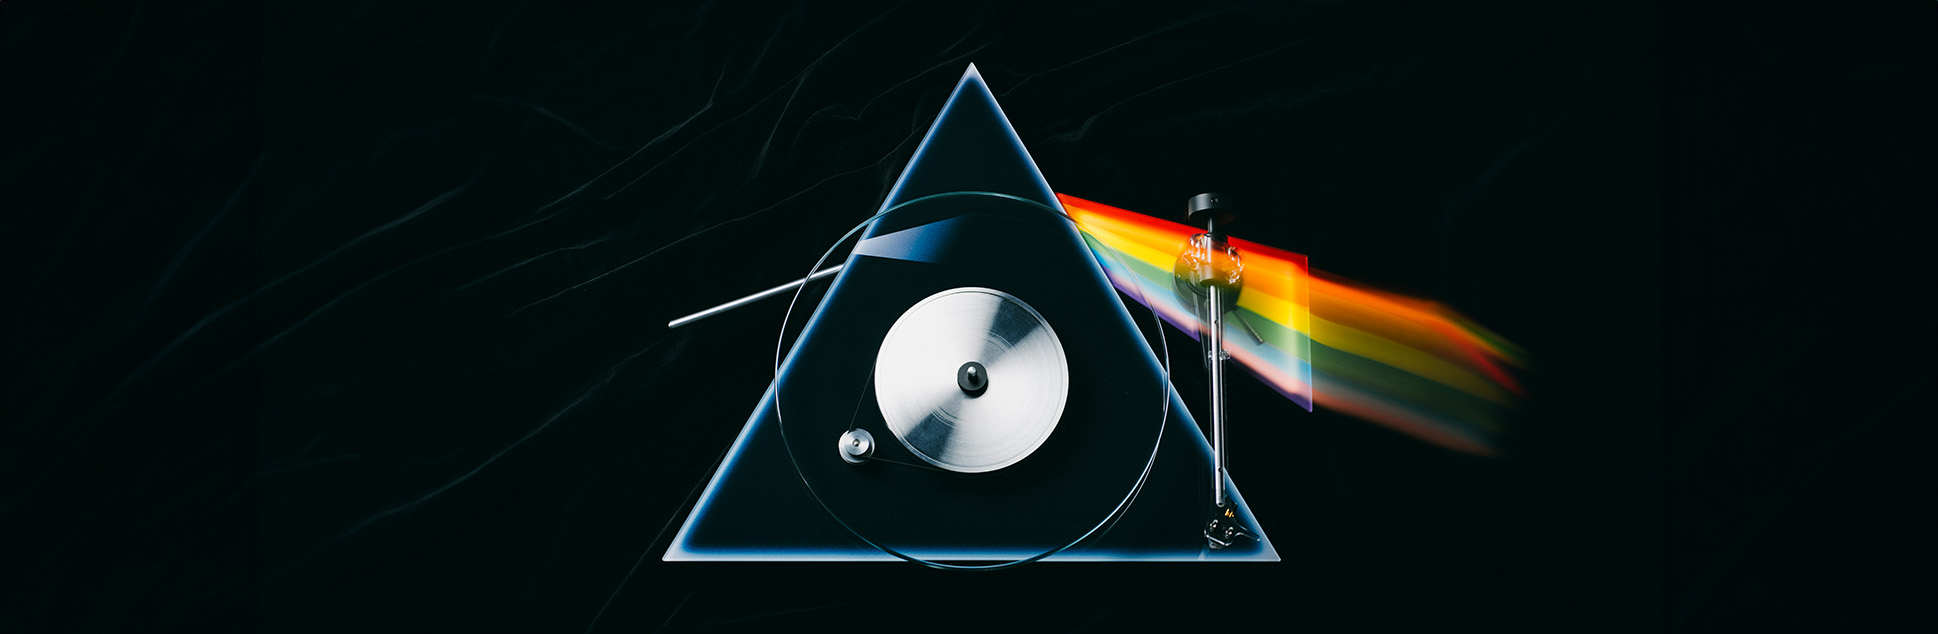 The Dark Side Of The Moon 1